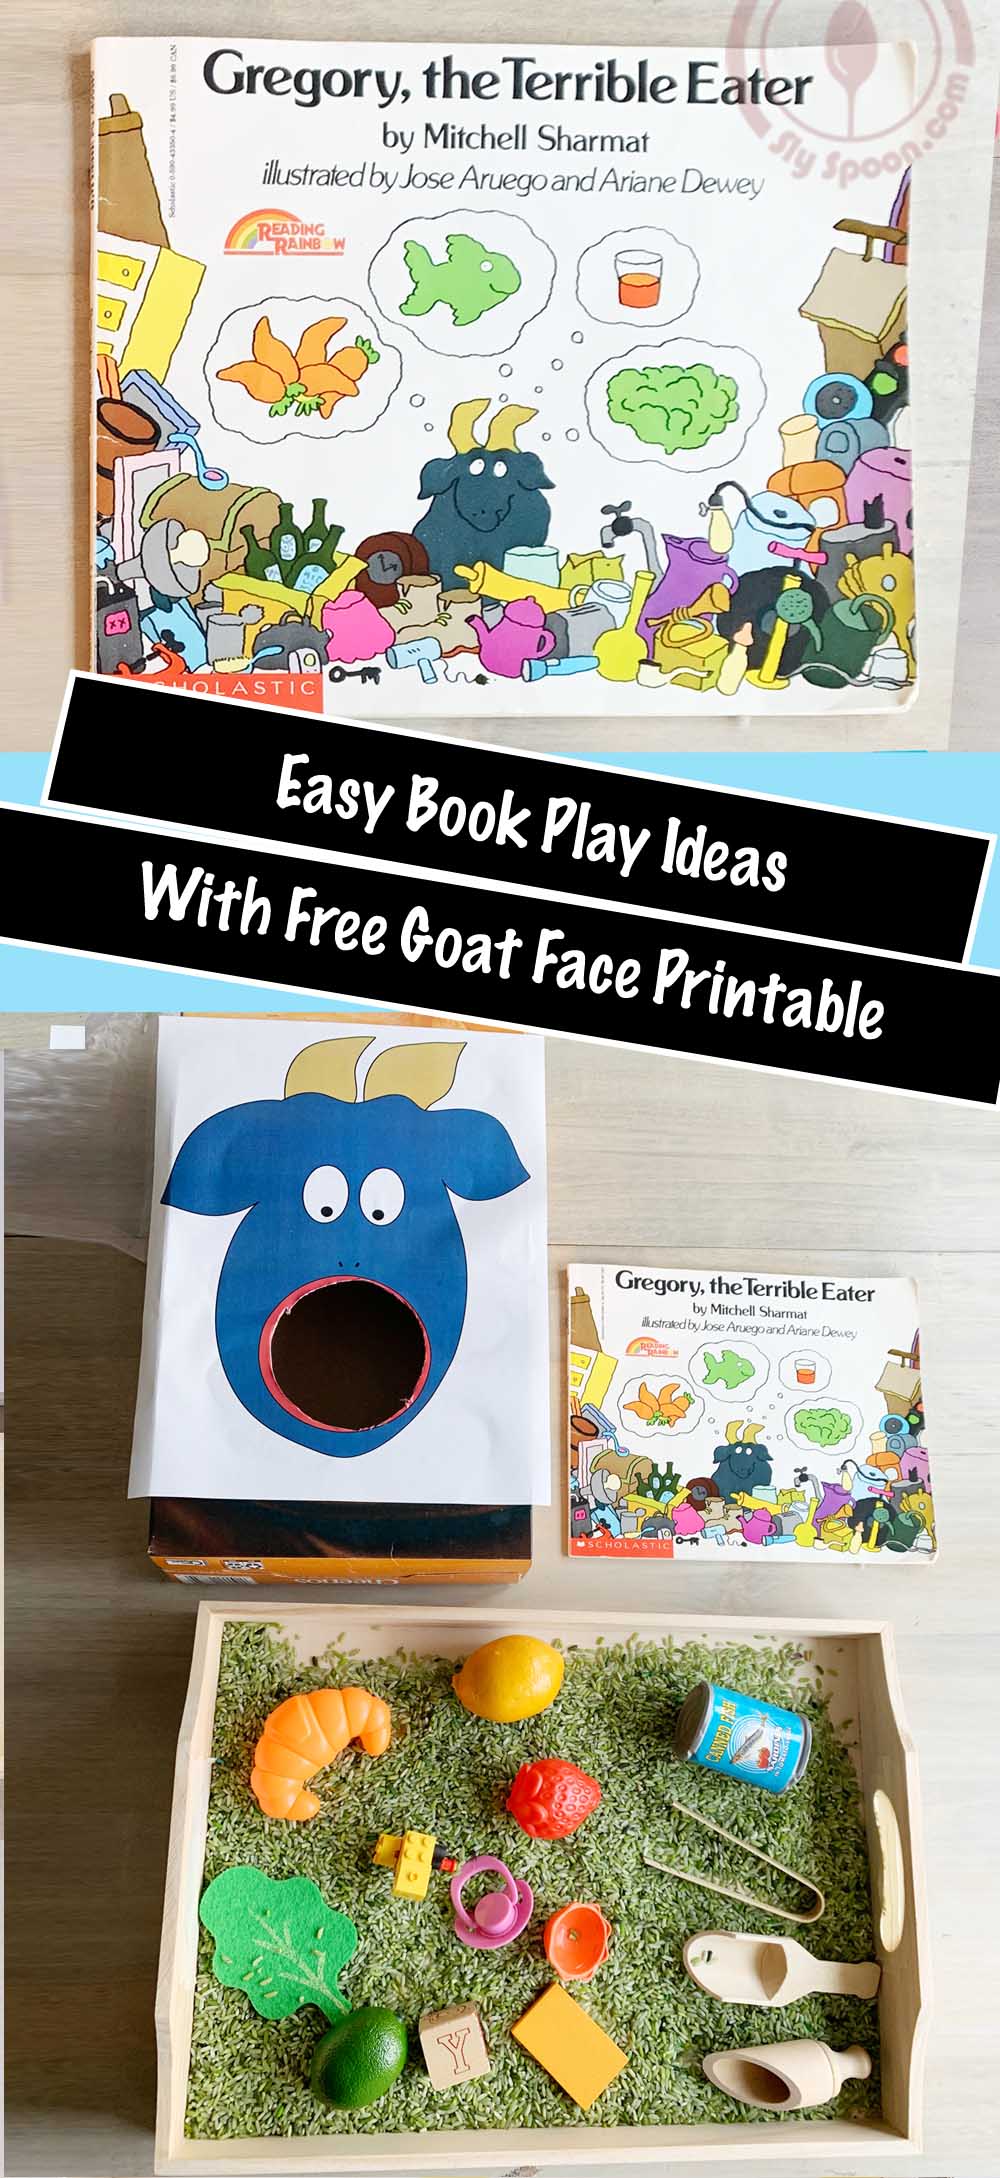 Letter G Book and Play Activity - Gregory The Terrible Eater Sensory Bin Idea with Free Printable